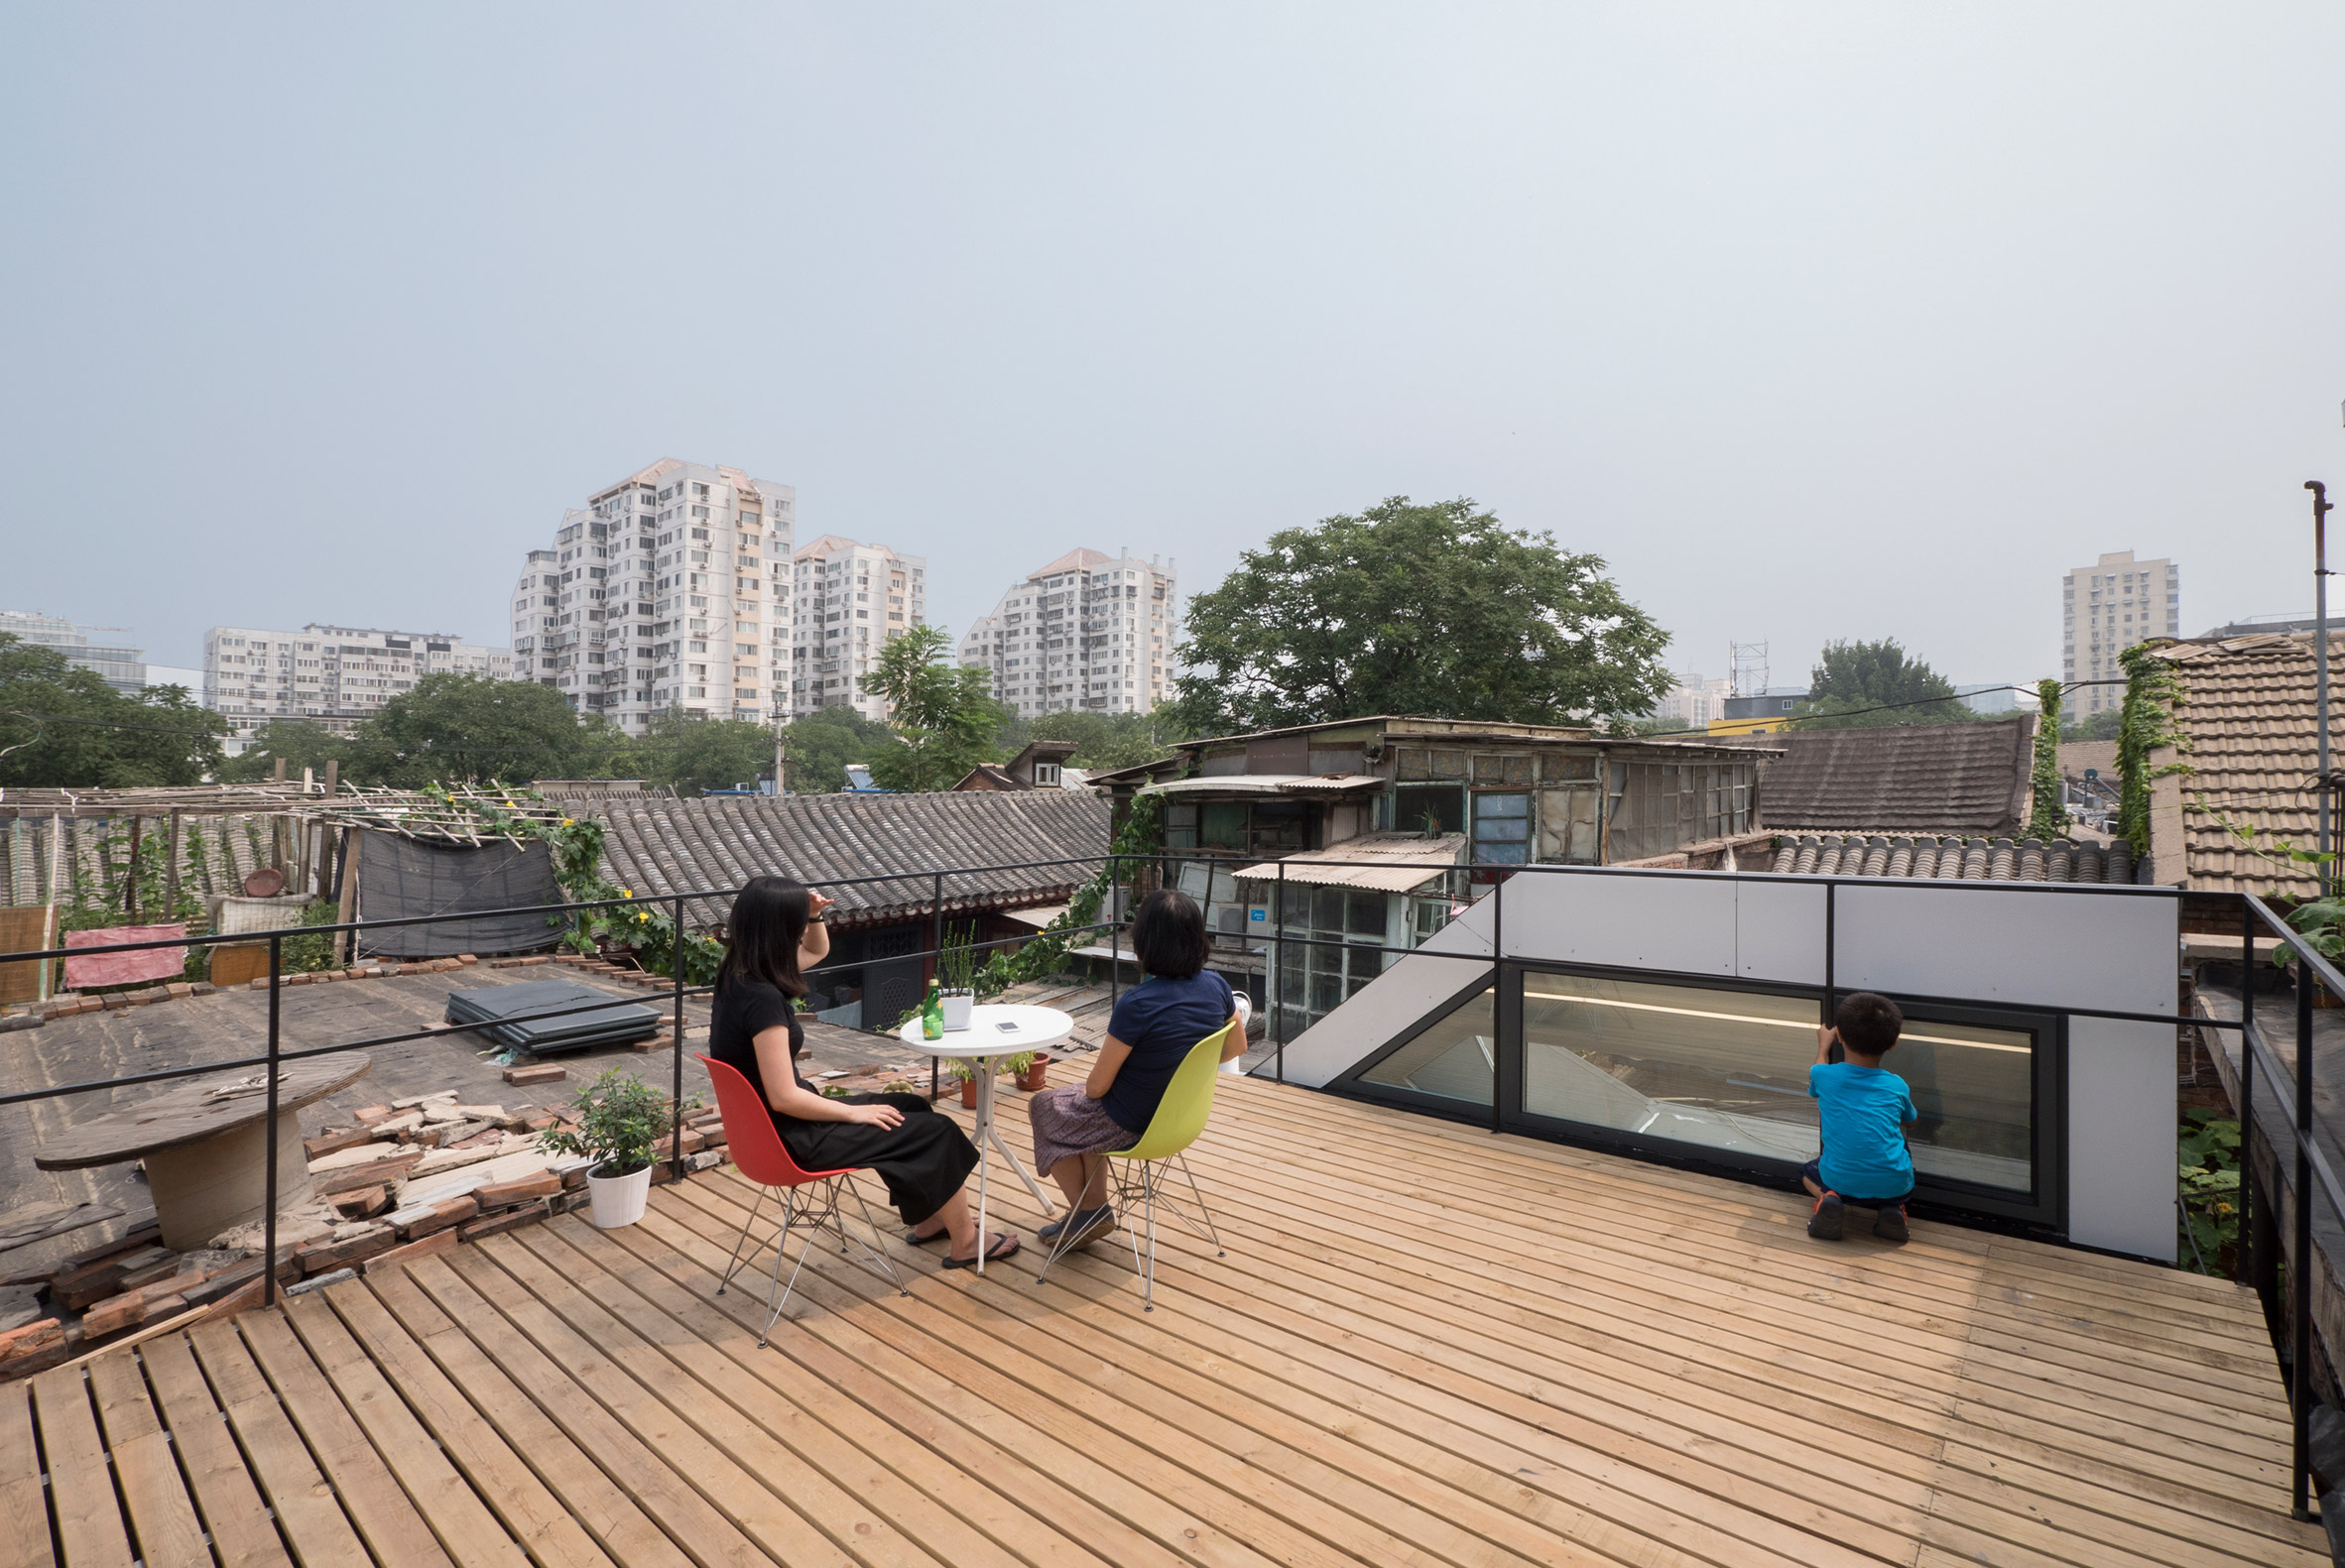 Mrs Fan's Plugin House by People's Architecture Office